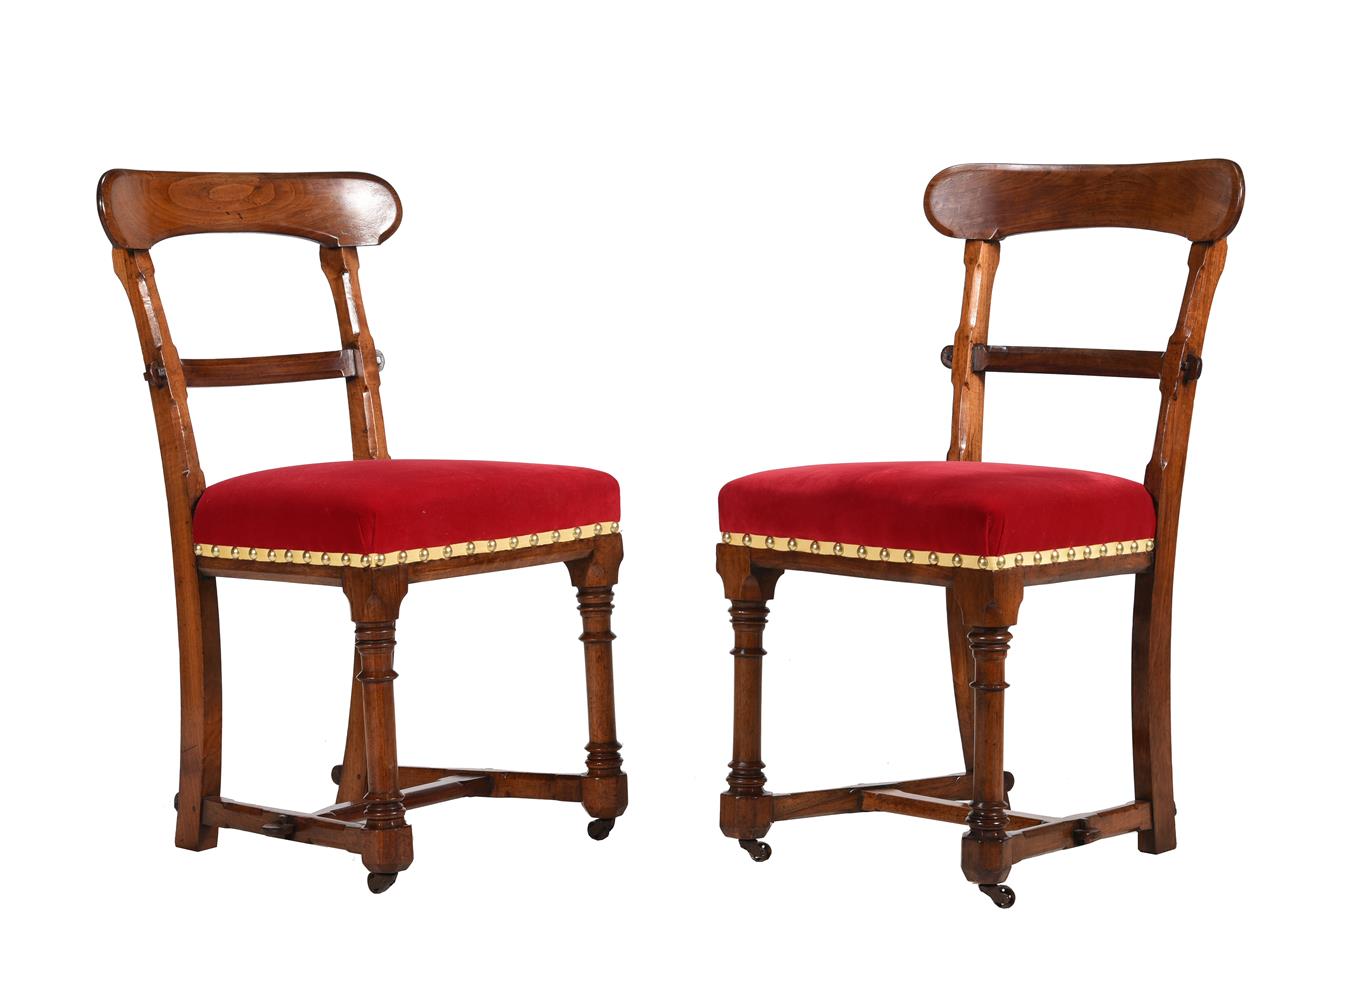 A PAIR OF REFORMED GOTHIC WALNUT SIDE CHAIRSATTRIBUTED TO EDWARD WELBY PUGIN